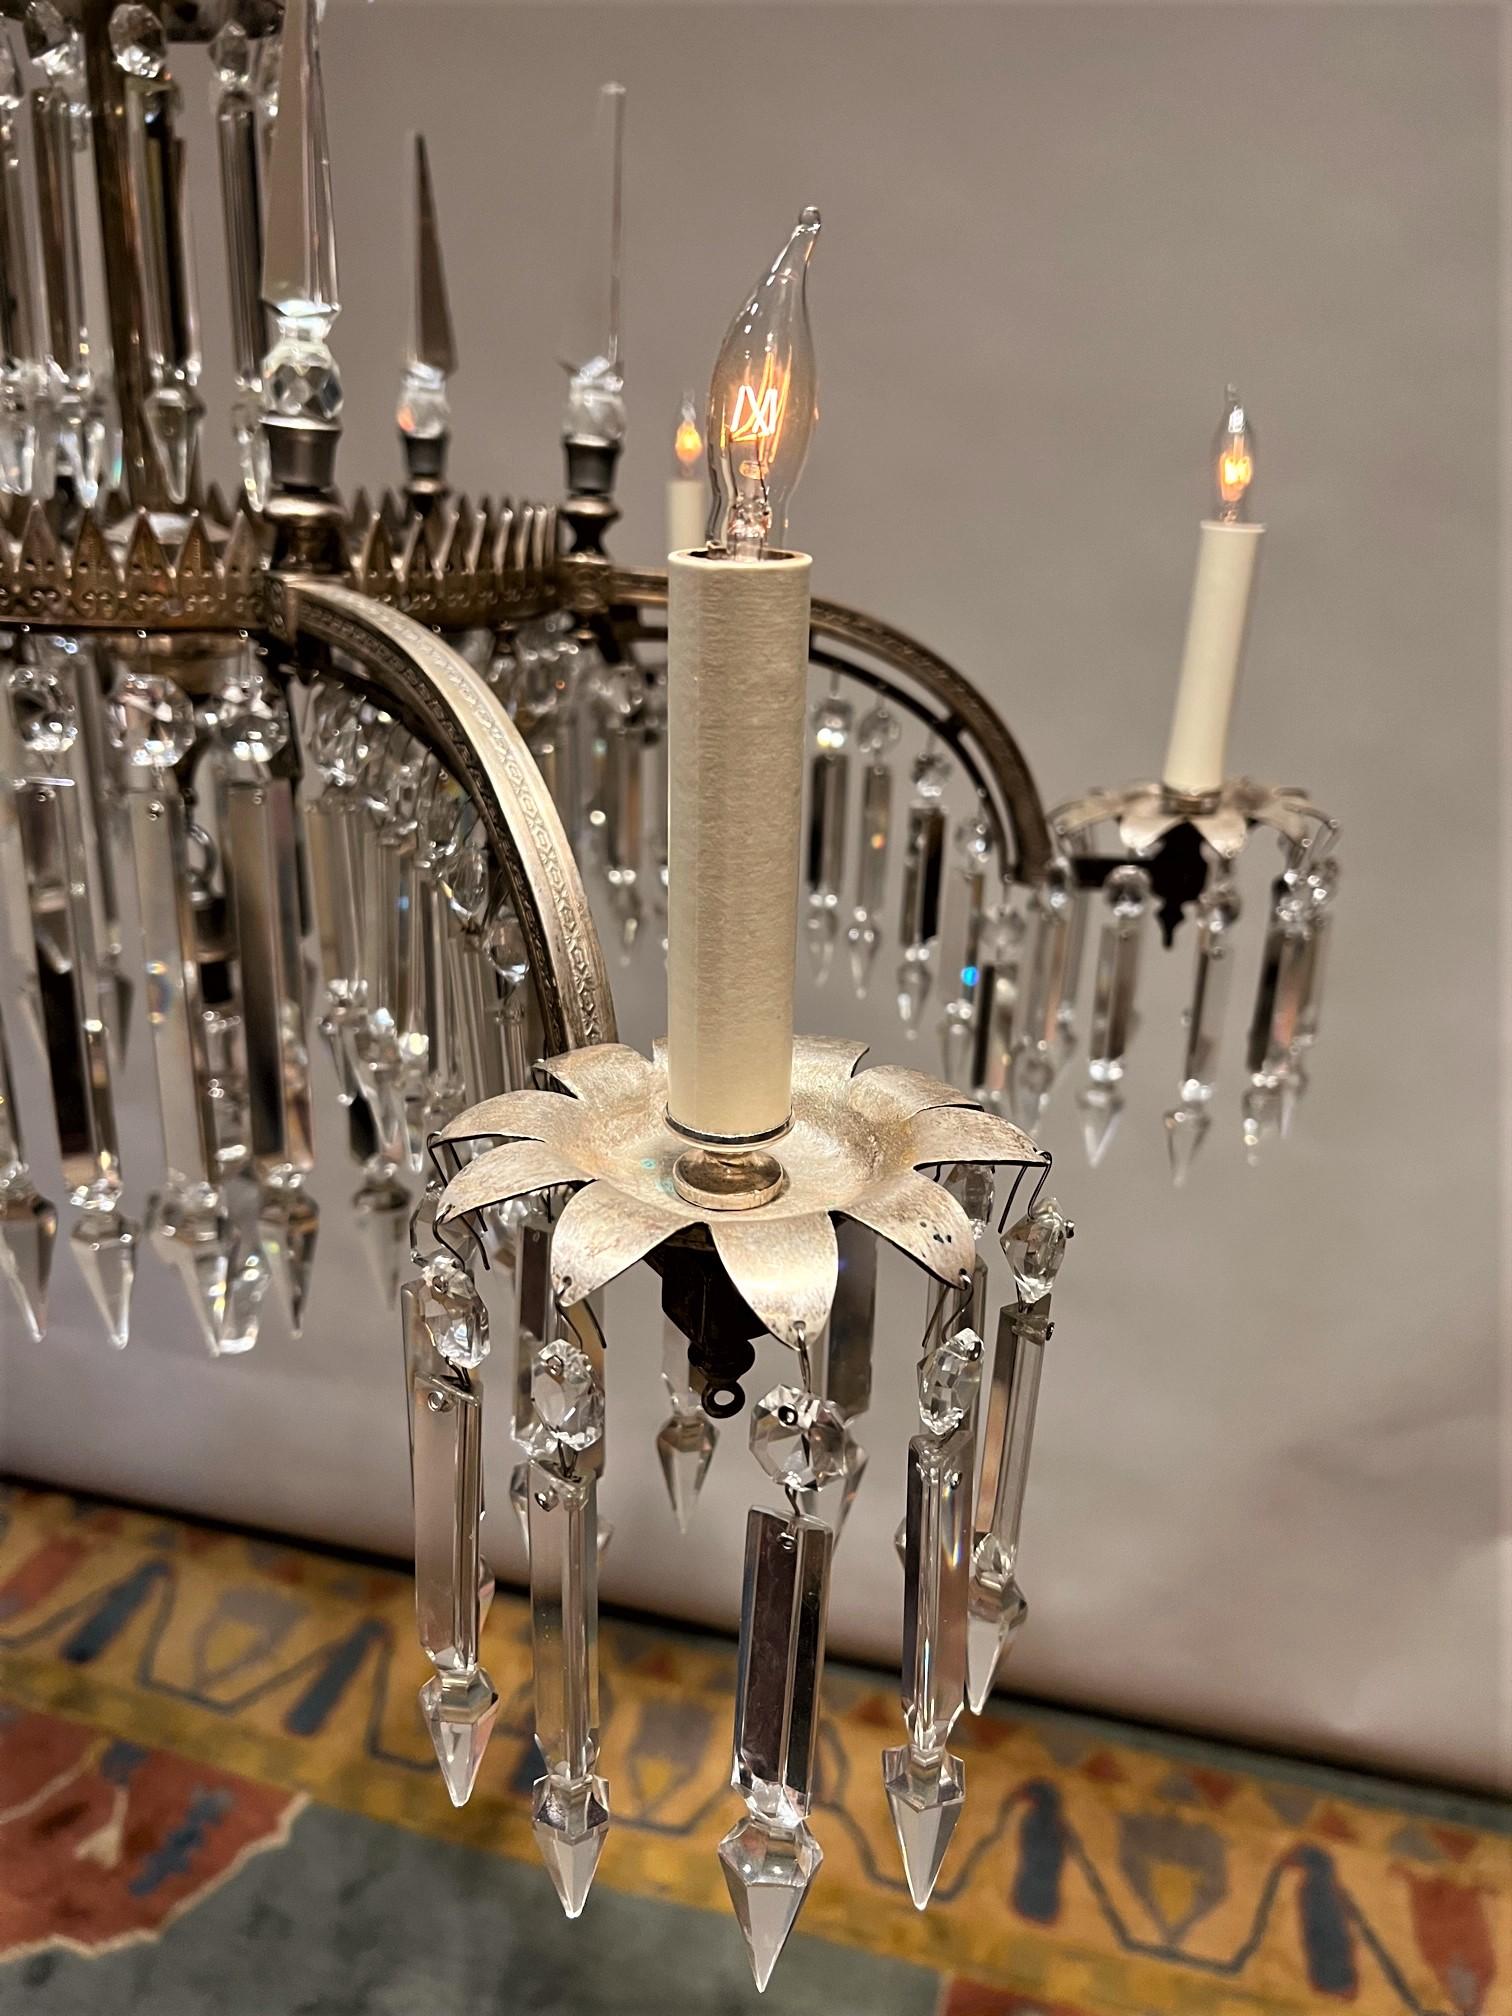 6-Light Silvered Bronze & Crystal Electrified Gasolier, America, Circa:1850 For Sale 4